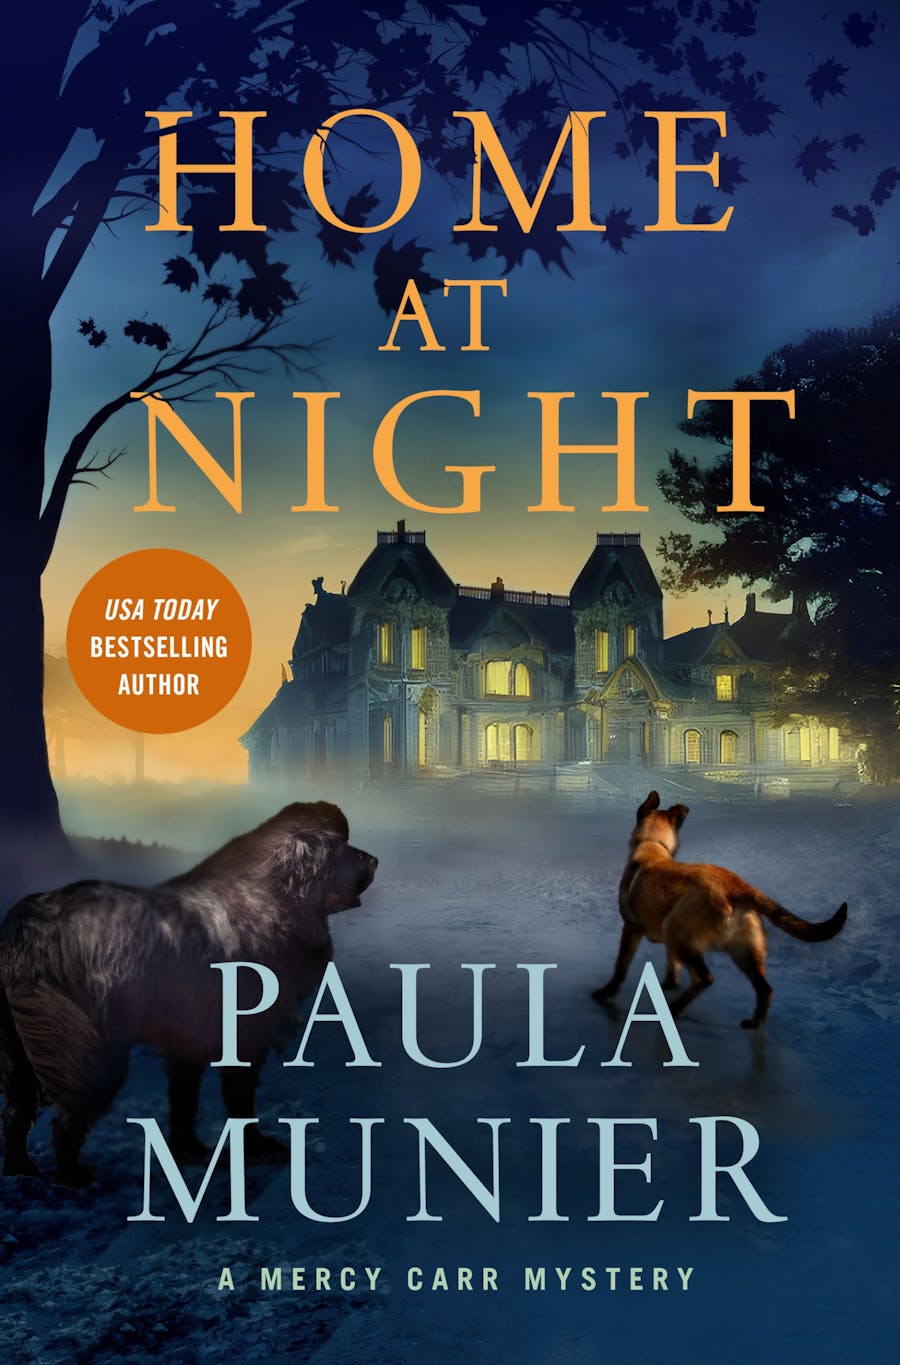 Cover art for Paula Munier's HOME AT NIGHT: A MERCY CARR MYSTERY. Includes a large house in the distance, shrouded in fog with windows glowing, a dark tree silhouette in the foreground, and a malinoise dog and newfoundland retriever dog in the foreground.